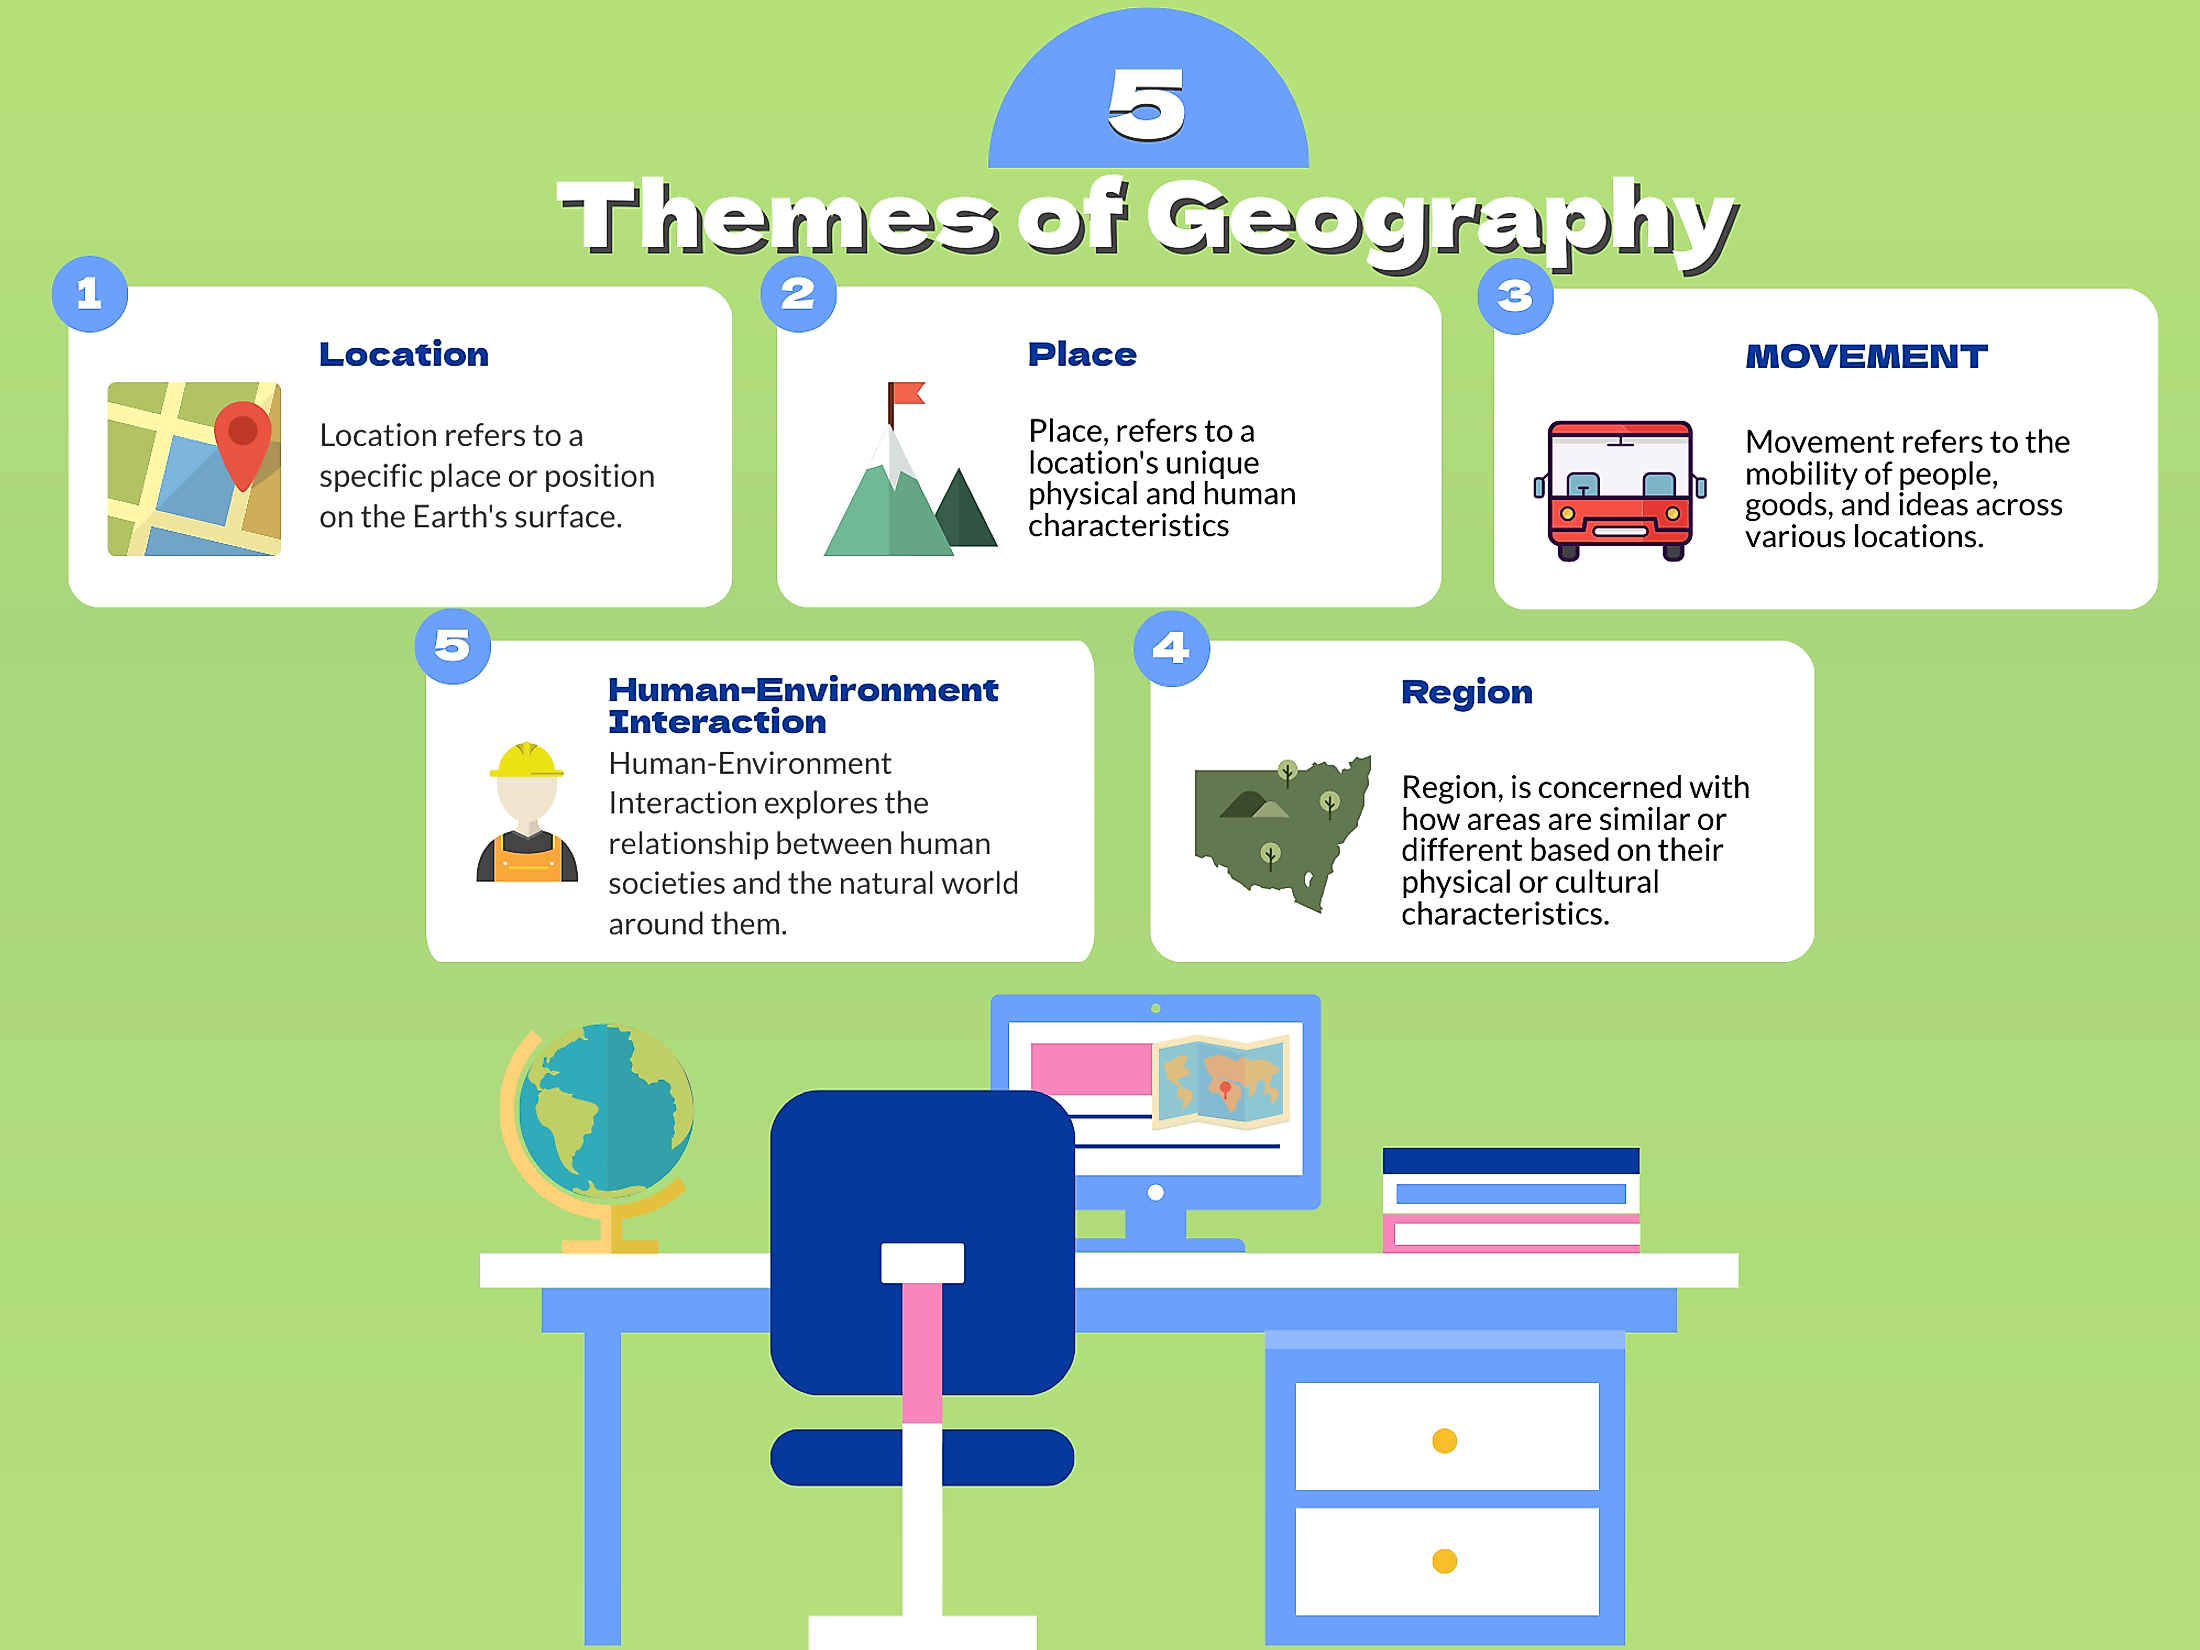 What are the 5 themes of geography explained?